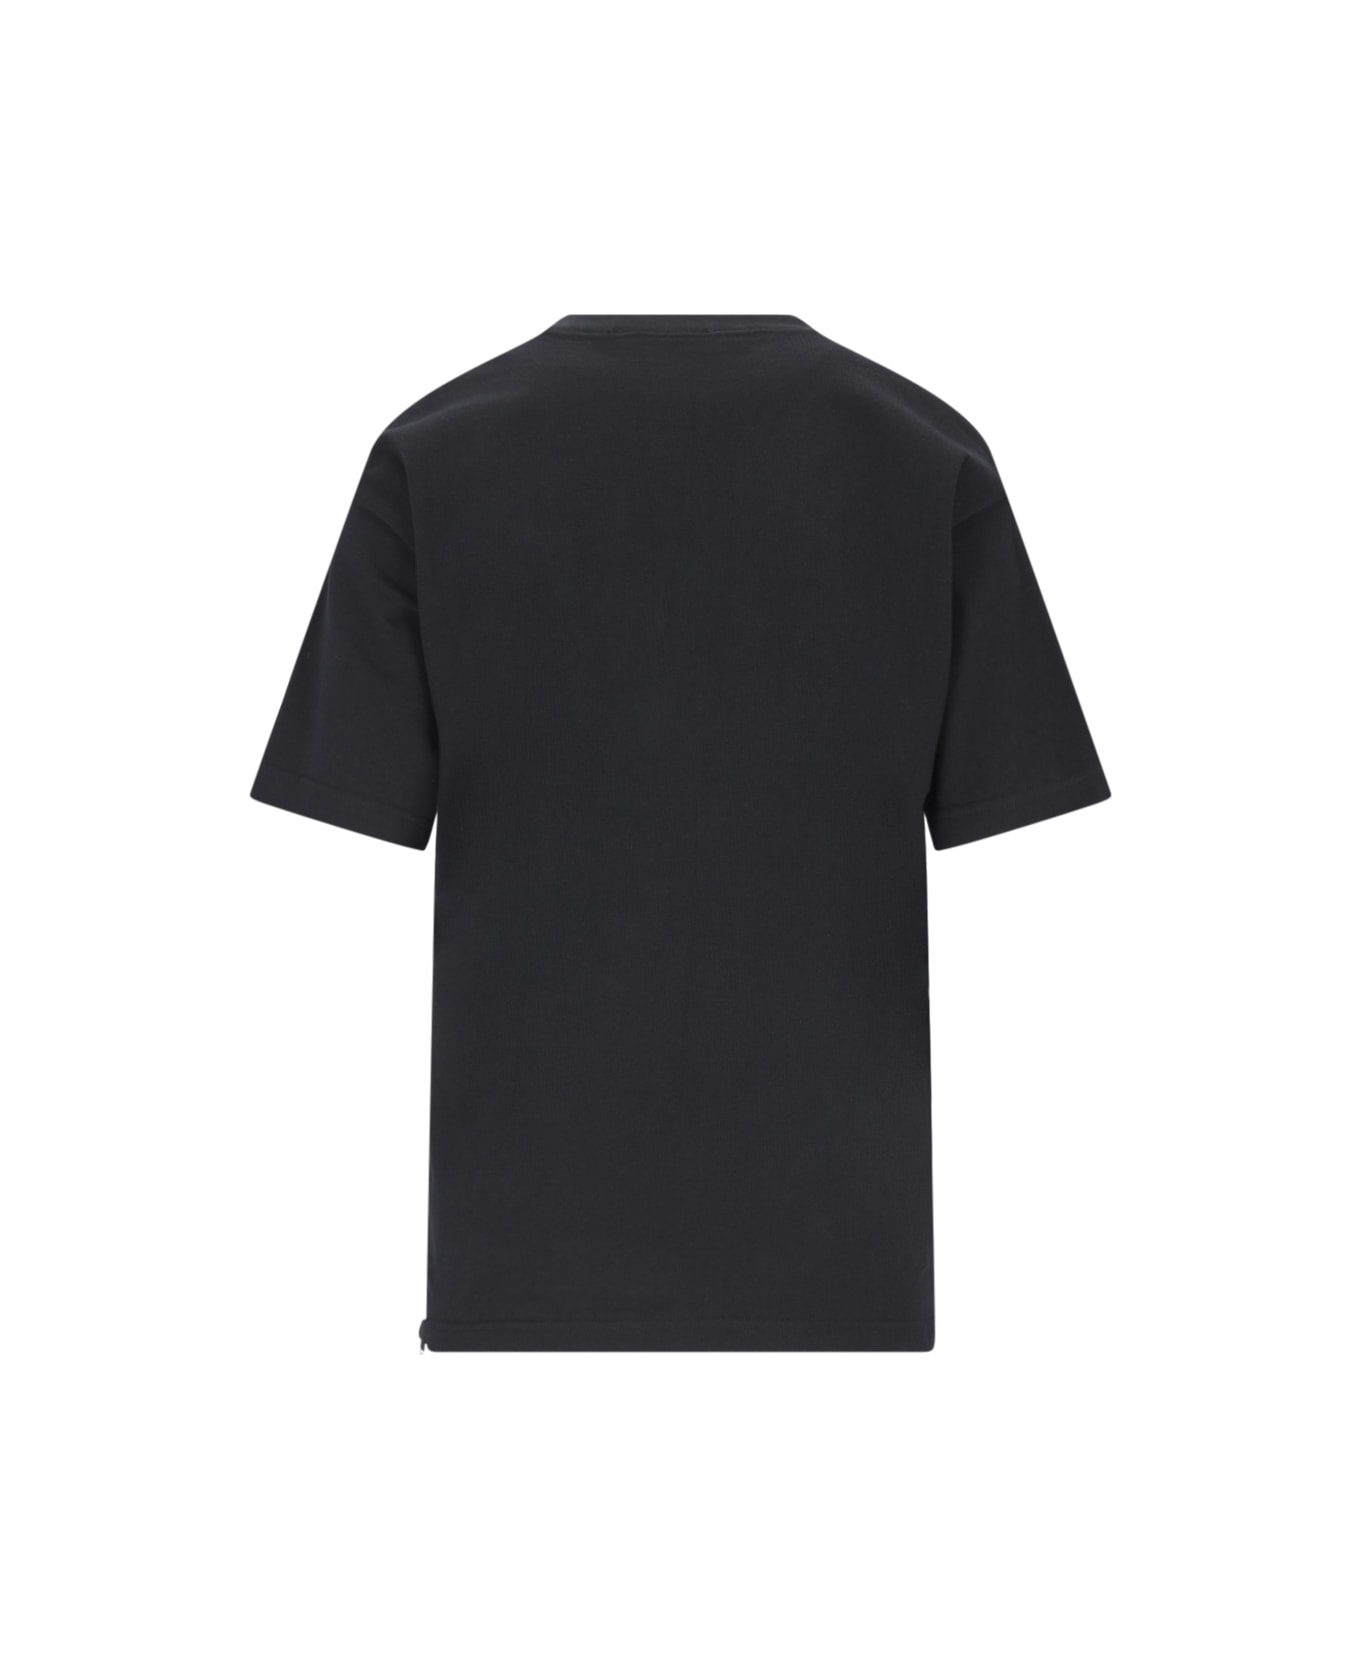 Undercover Jun Takahashi Embroidery Detail T-shirt - Black   Tシャツ